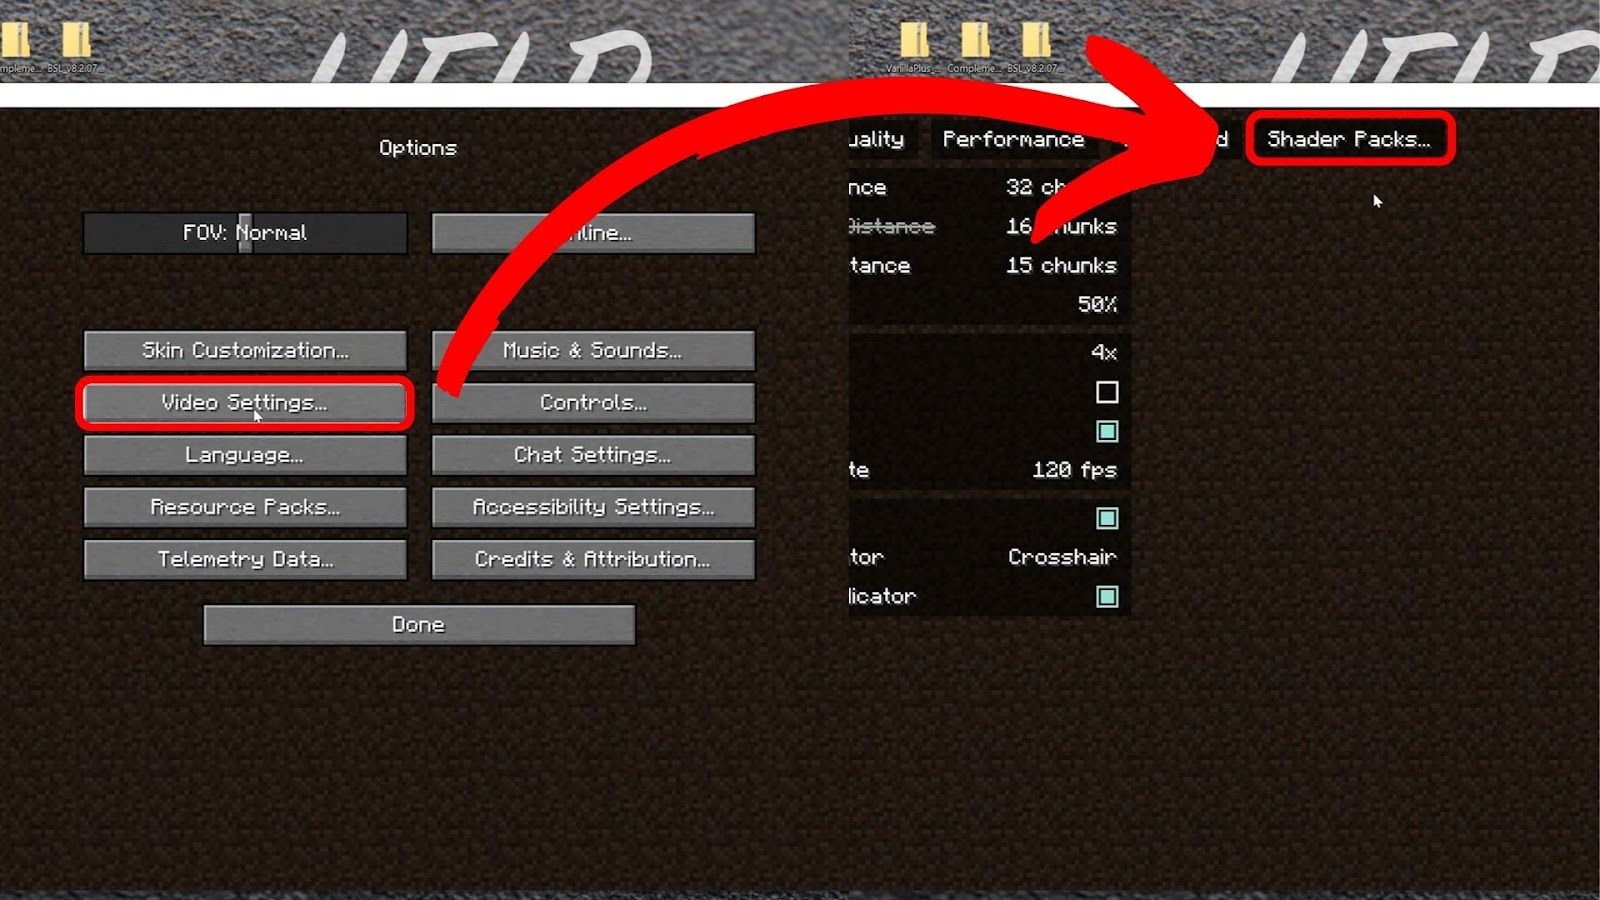 Install Minecraft Shaders - Go to Video Settings